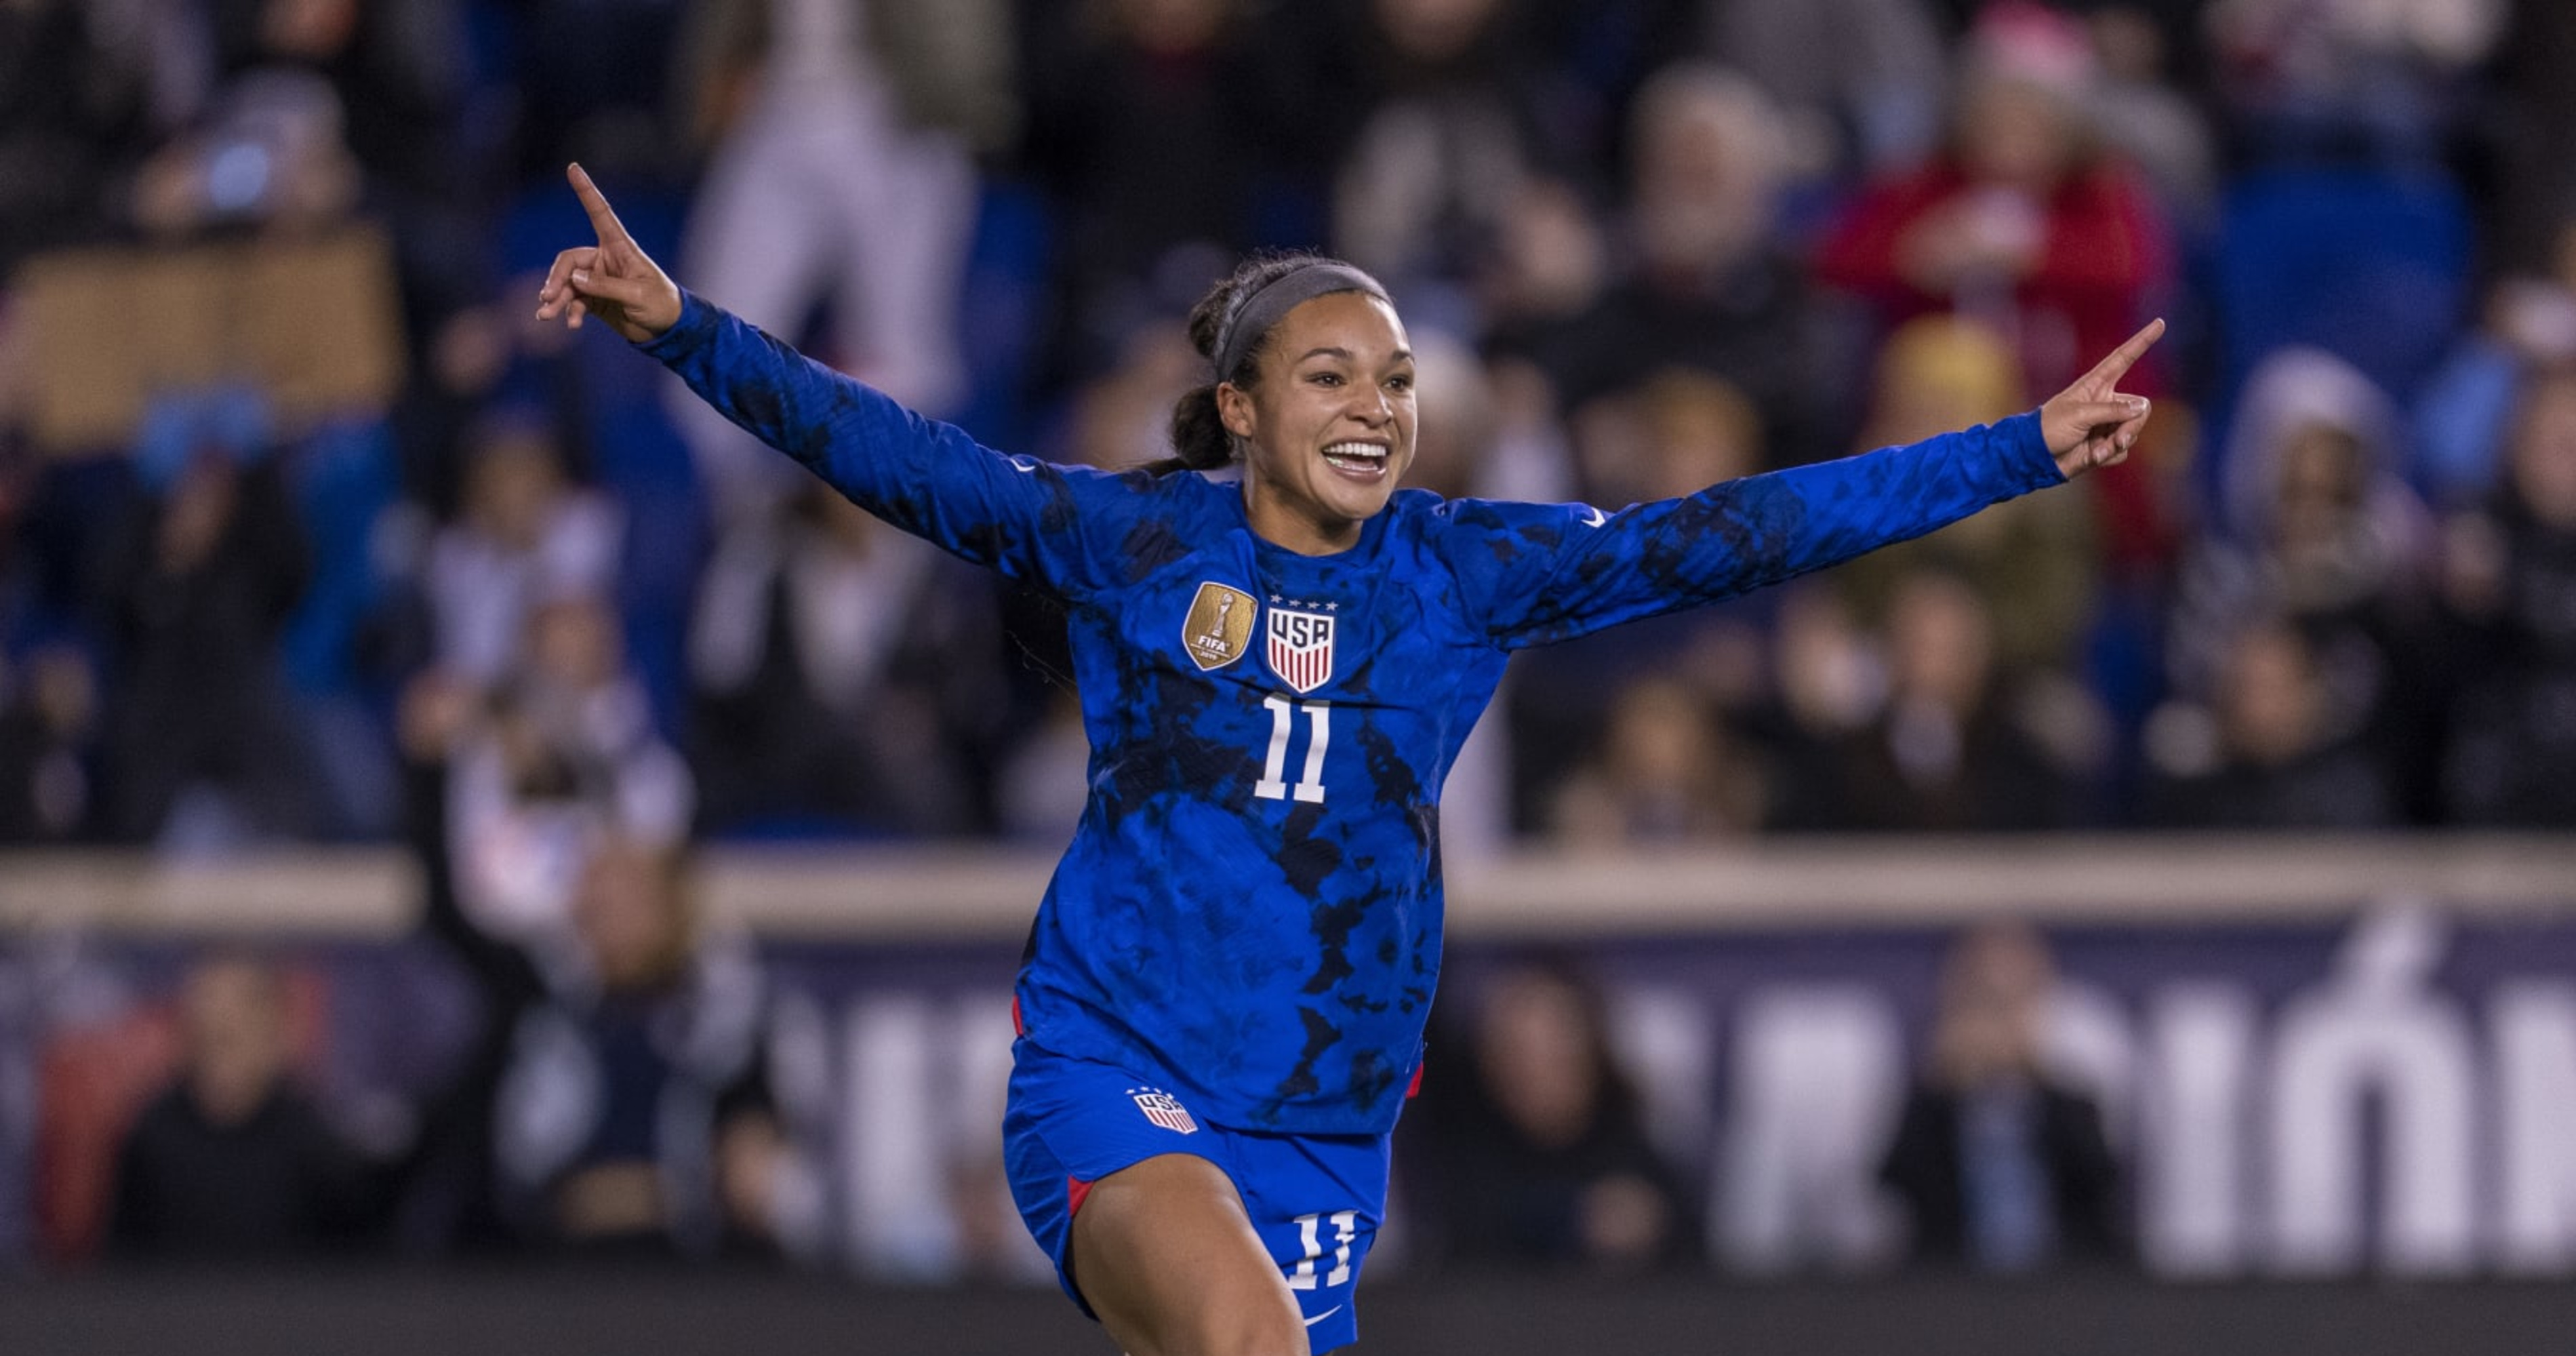 Sophia Smith Named 2022 U.S. Soccer Female Player of the Year News